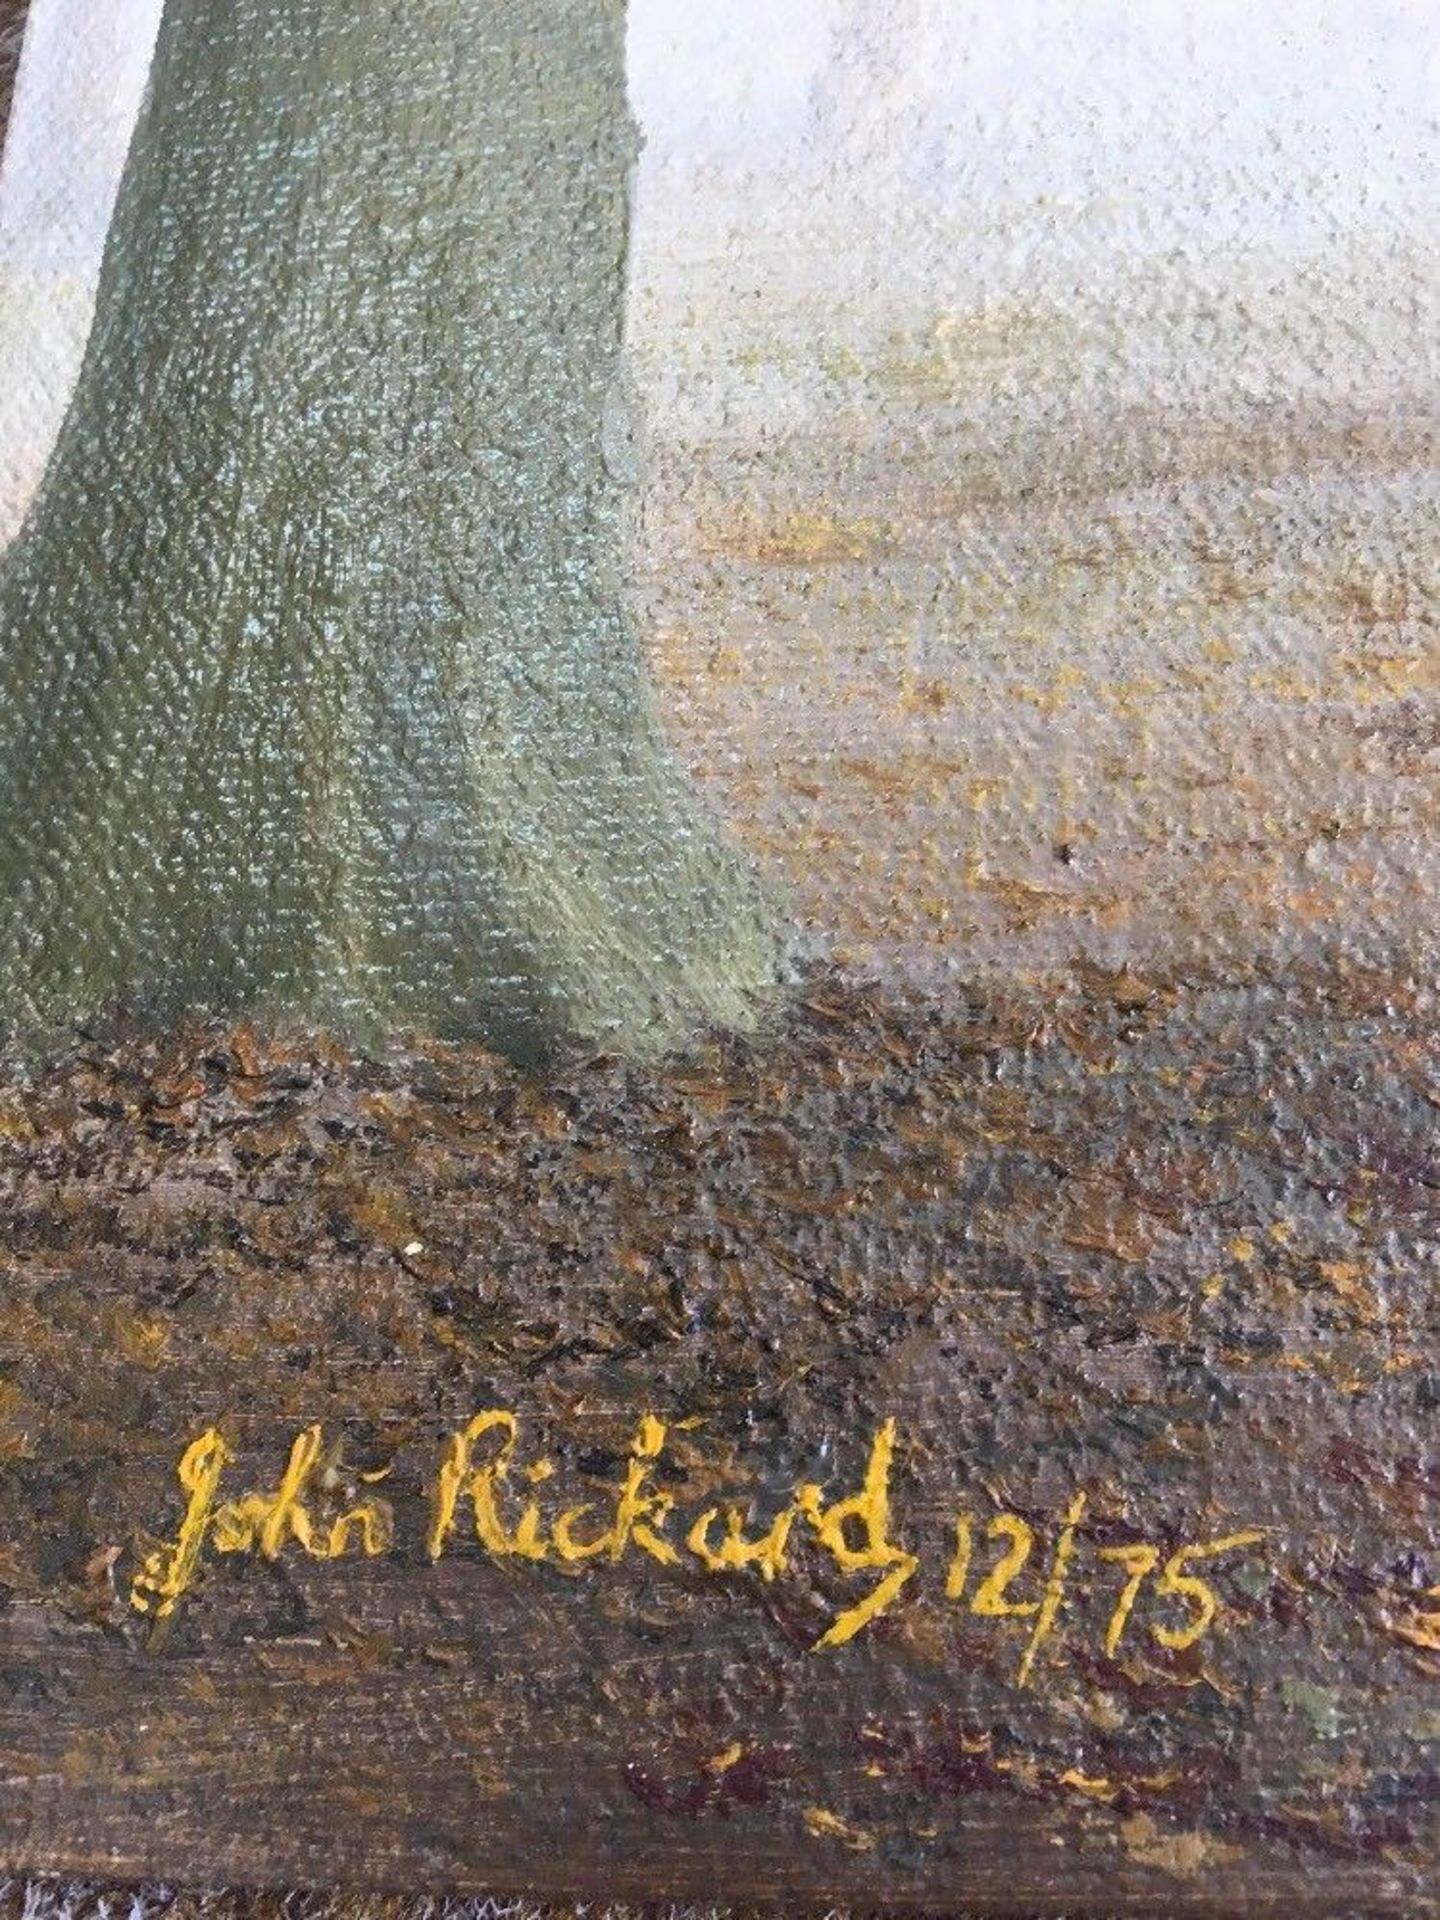 Signed Oil Painting by John Rickard "WOODLAND" 1975 - Image 2 of 4